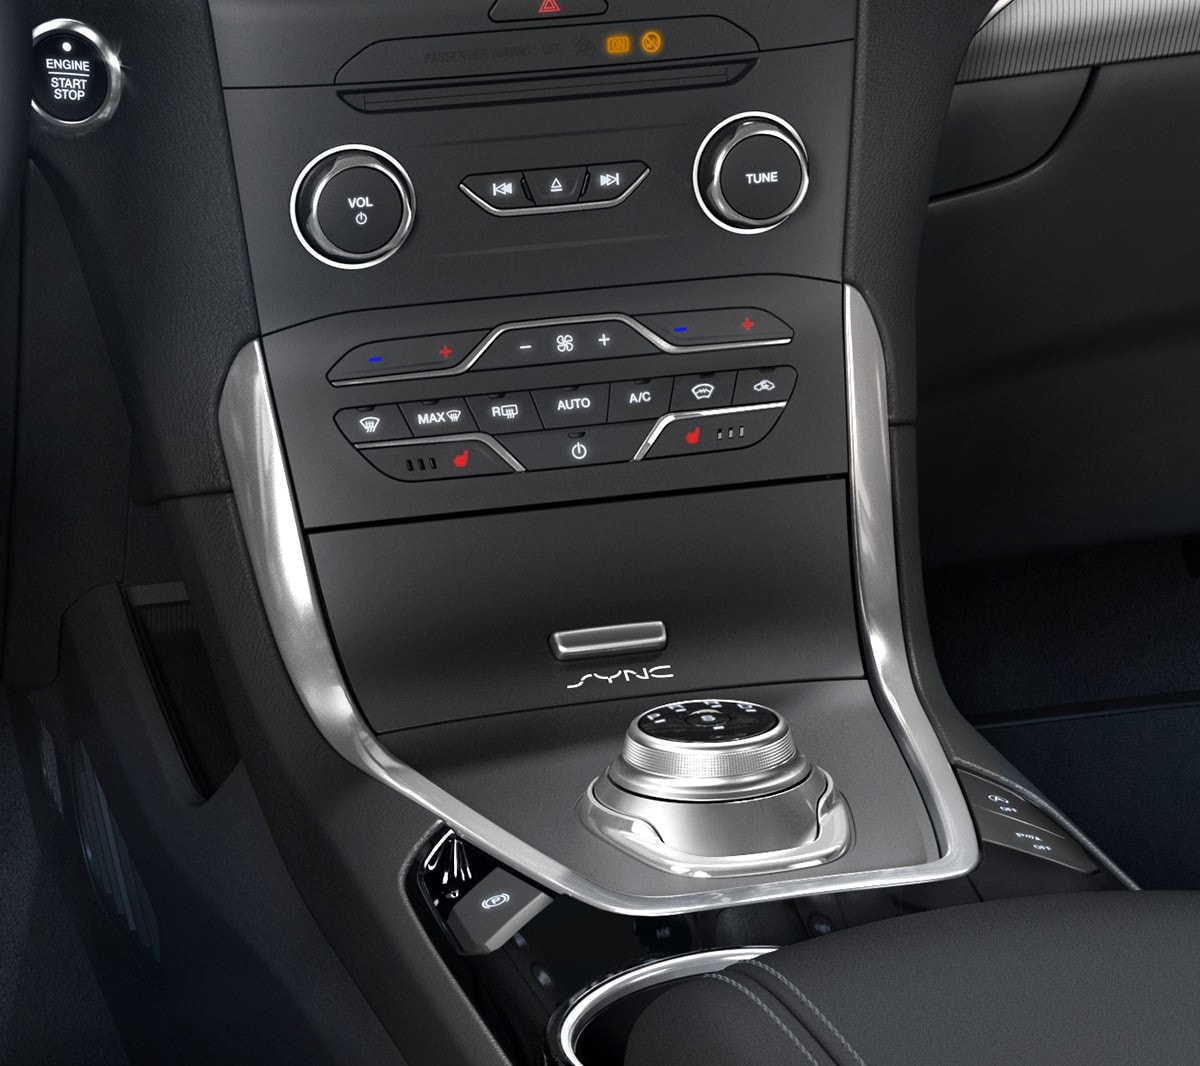 Ford S-MAX interior showing automatic transmission